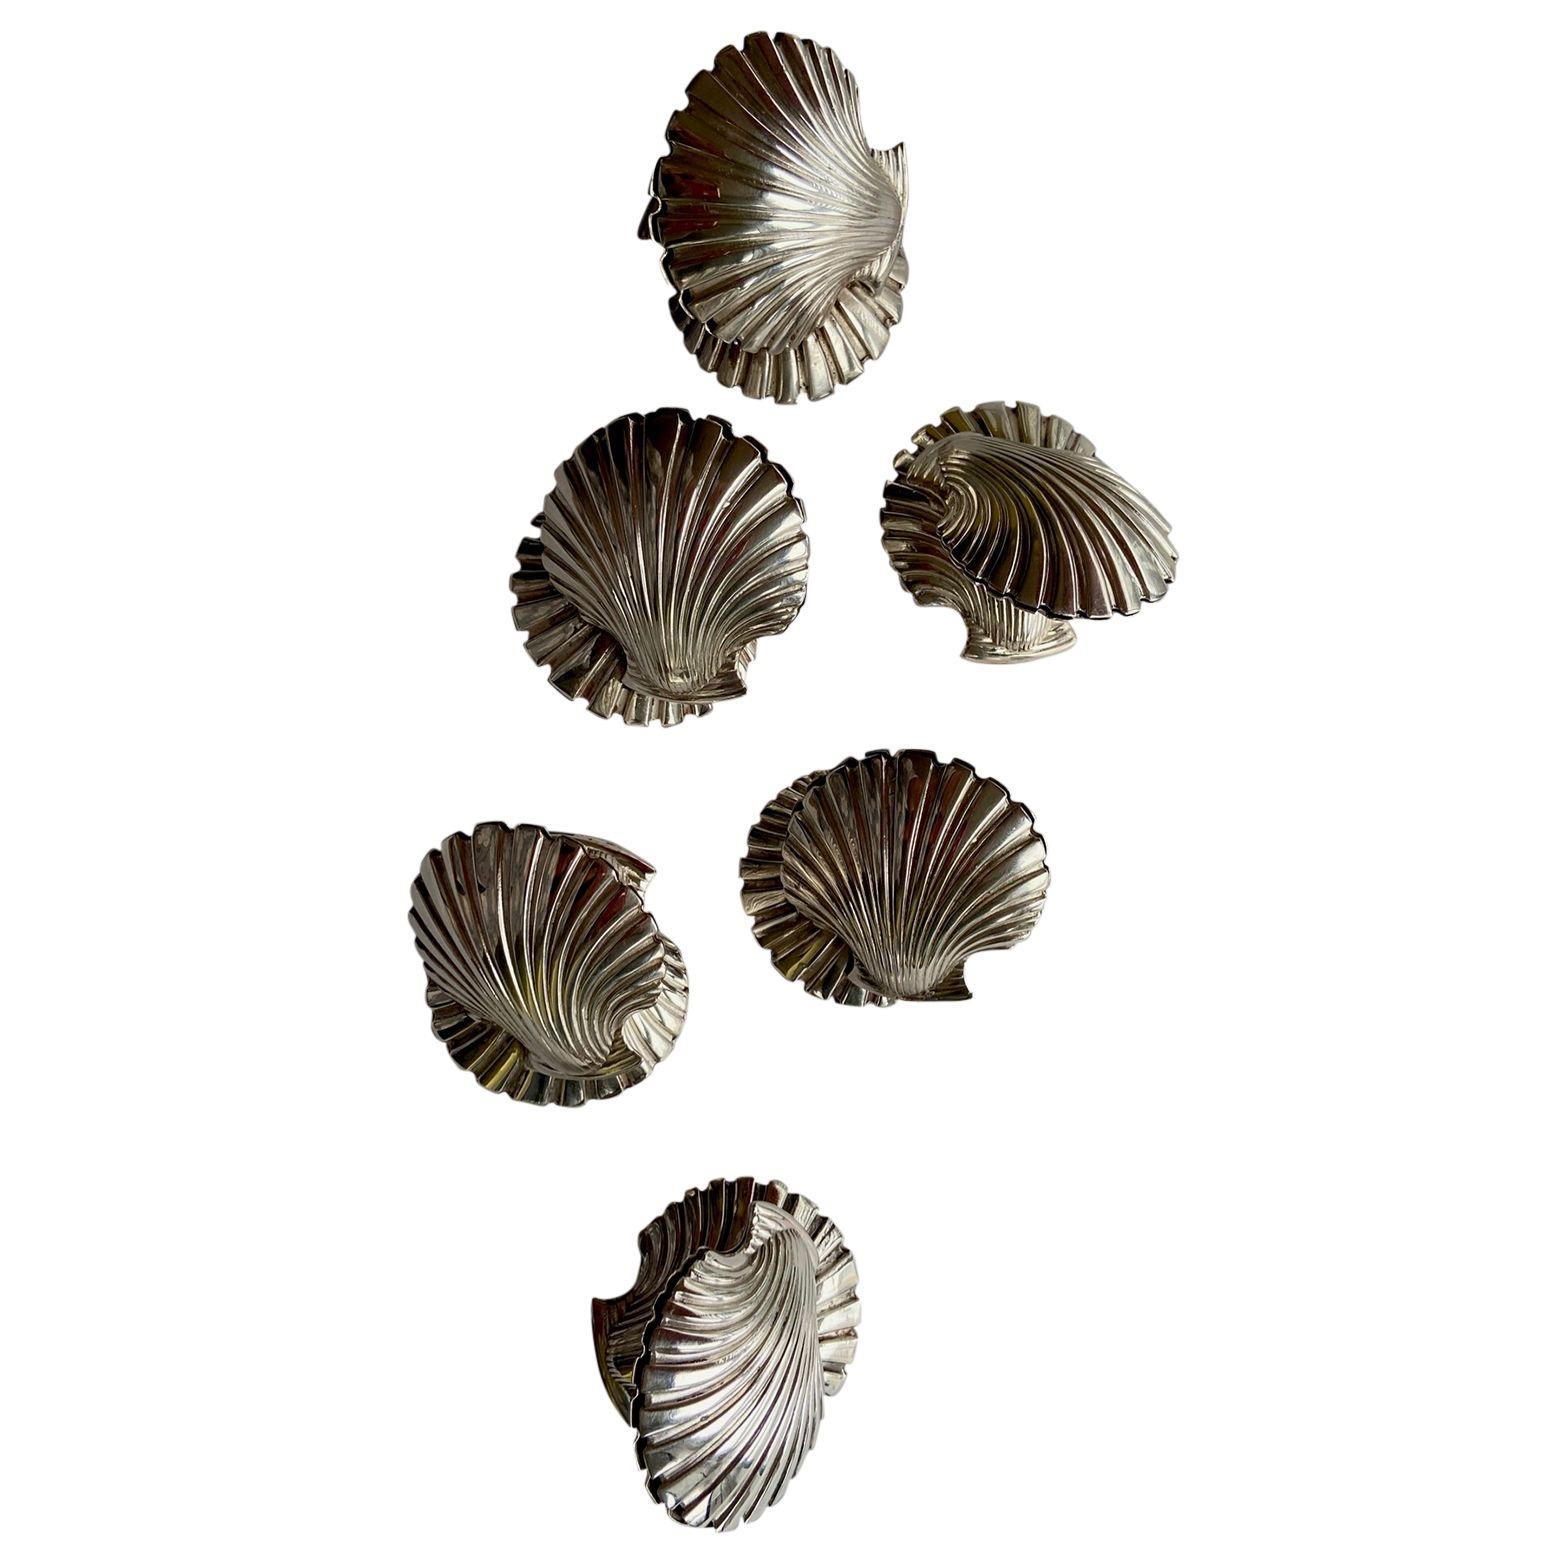 6 Vintage 1940s-1950s Silver Plated Shells, Place Card Holders, Fratelli Broggi In Good Condition For Sale In London, GB